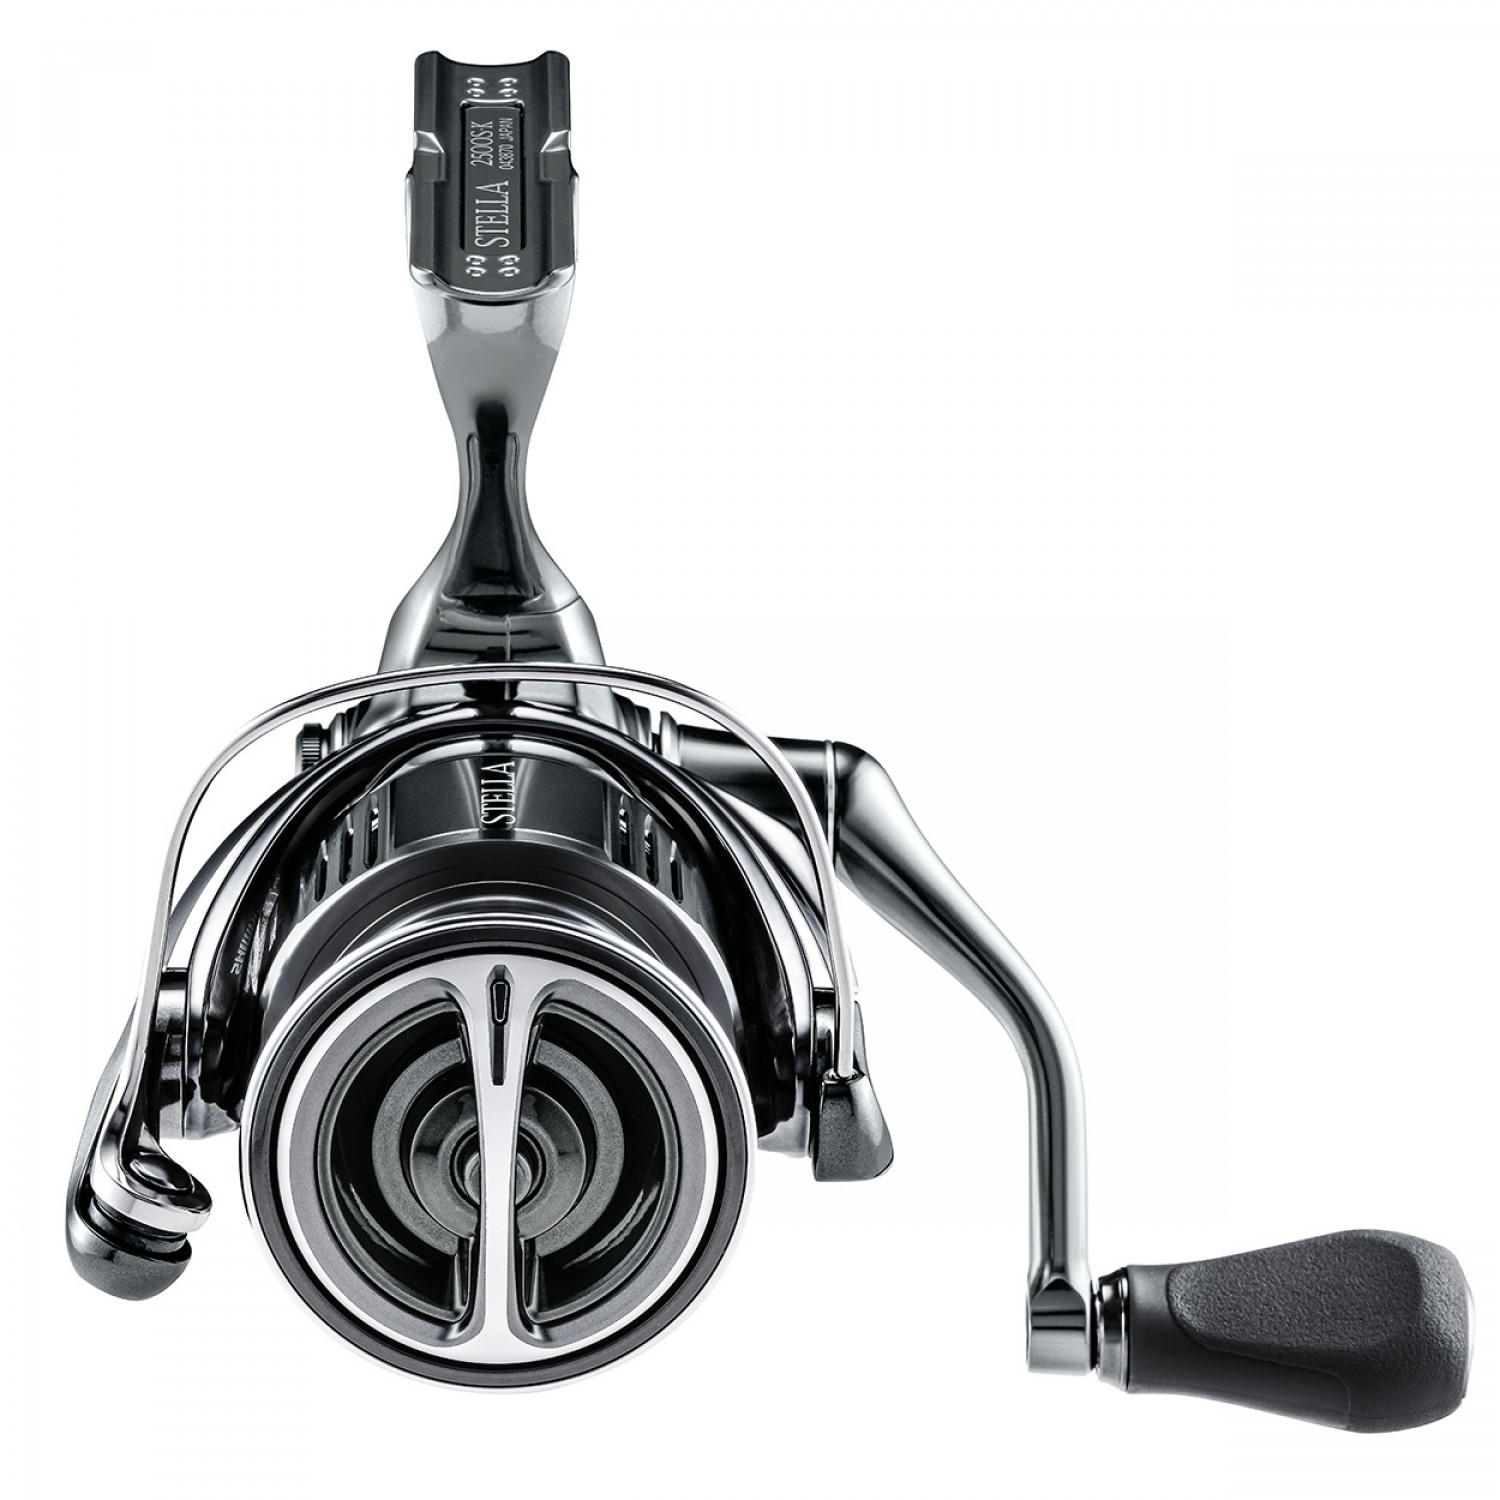 Shimano Stella STL1000FJ 5.1:1 Gear Ratio - Used Spinning Reel - Excellent  Condition - American Legacy Fishing, G Loomis Superstore